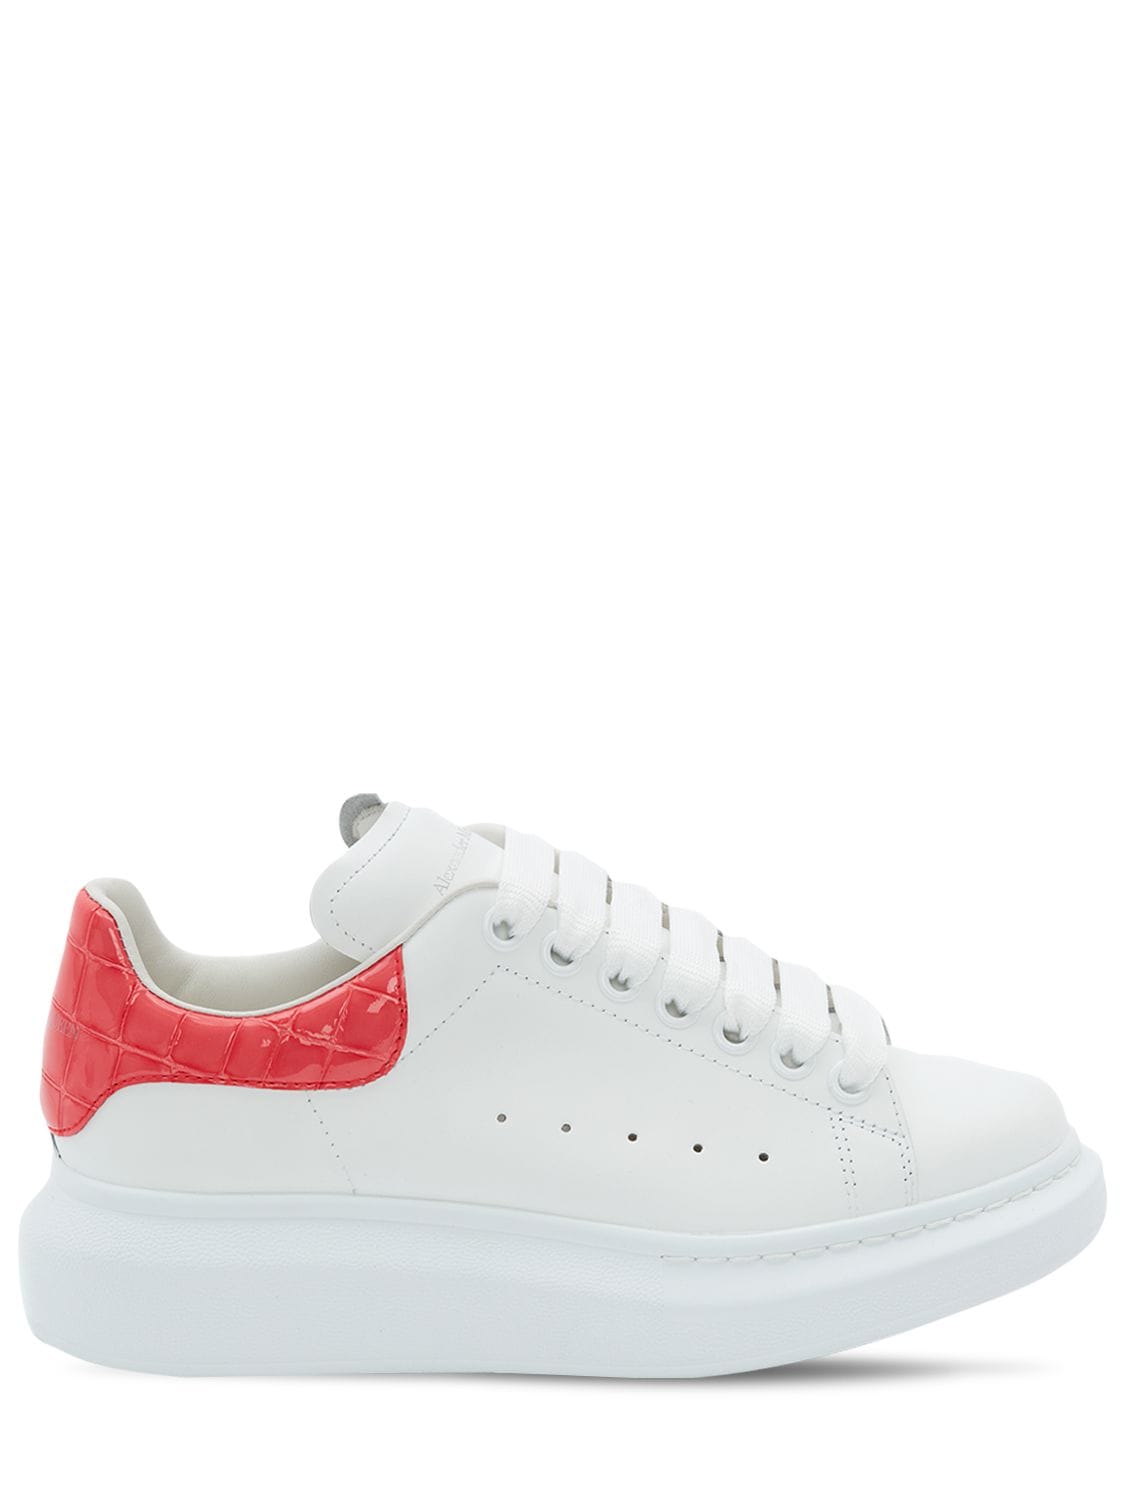 Alexander Mcqueen 45mm Leather & Croc Embossed Sneakers In White,coral ...